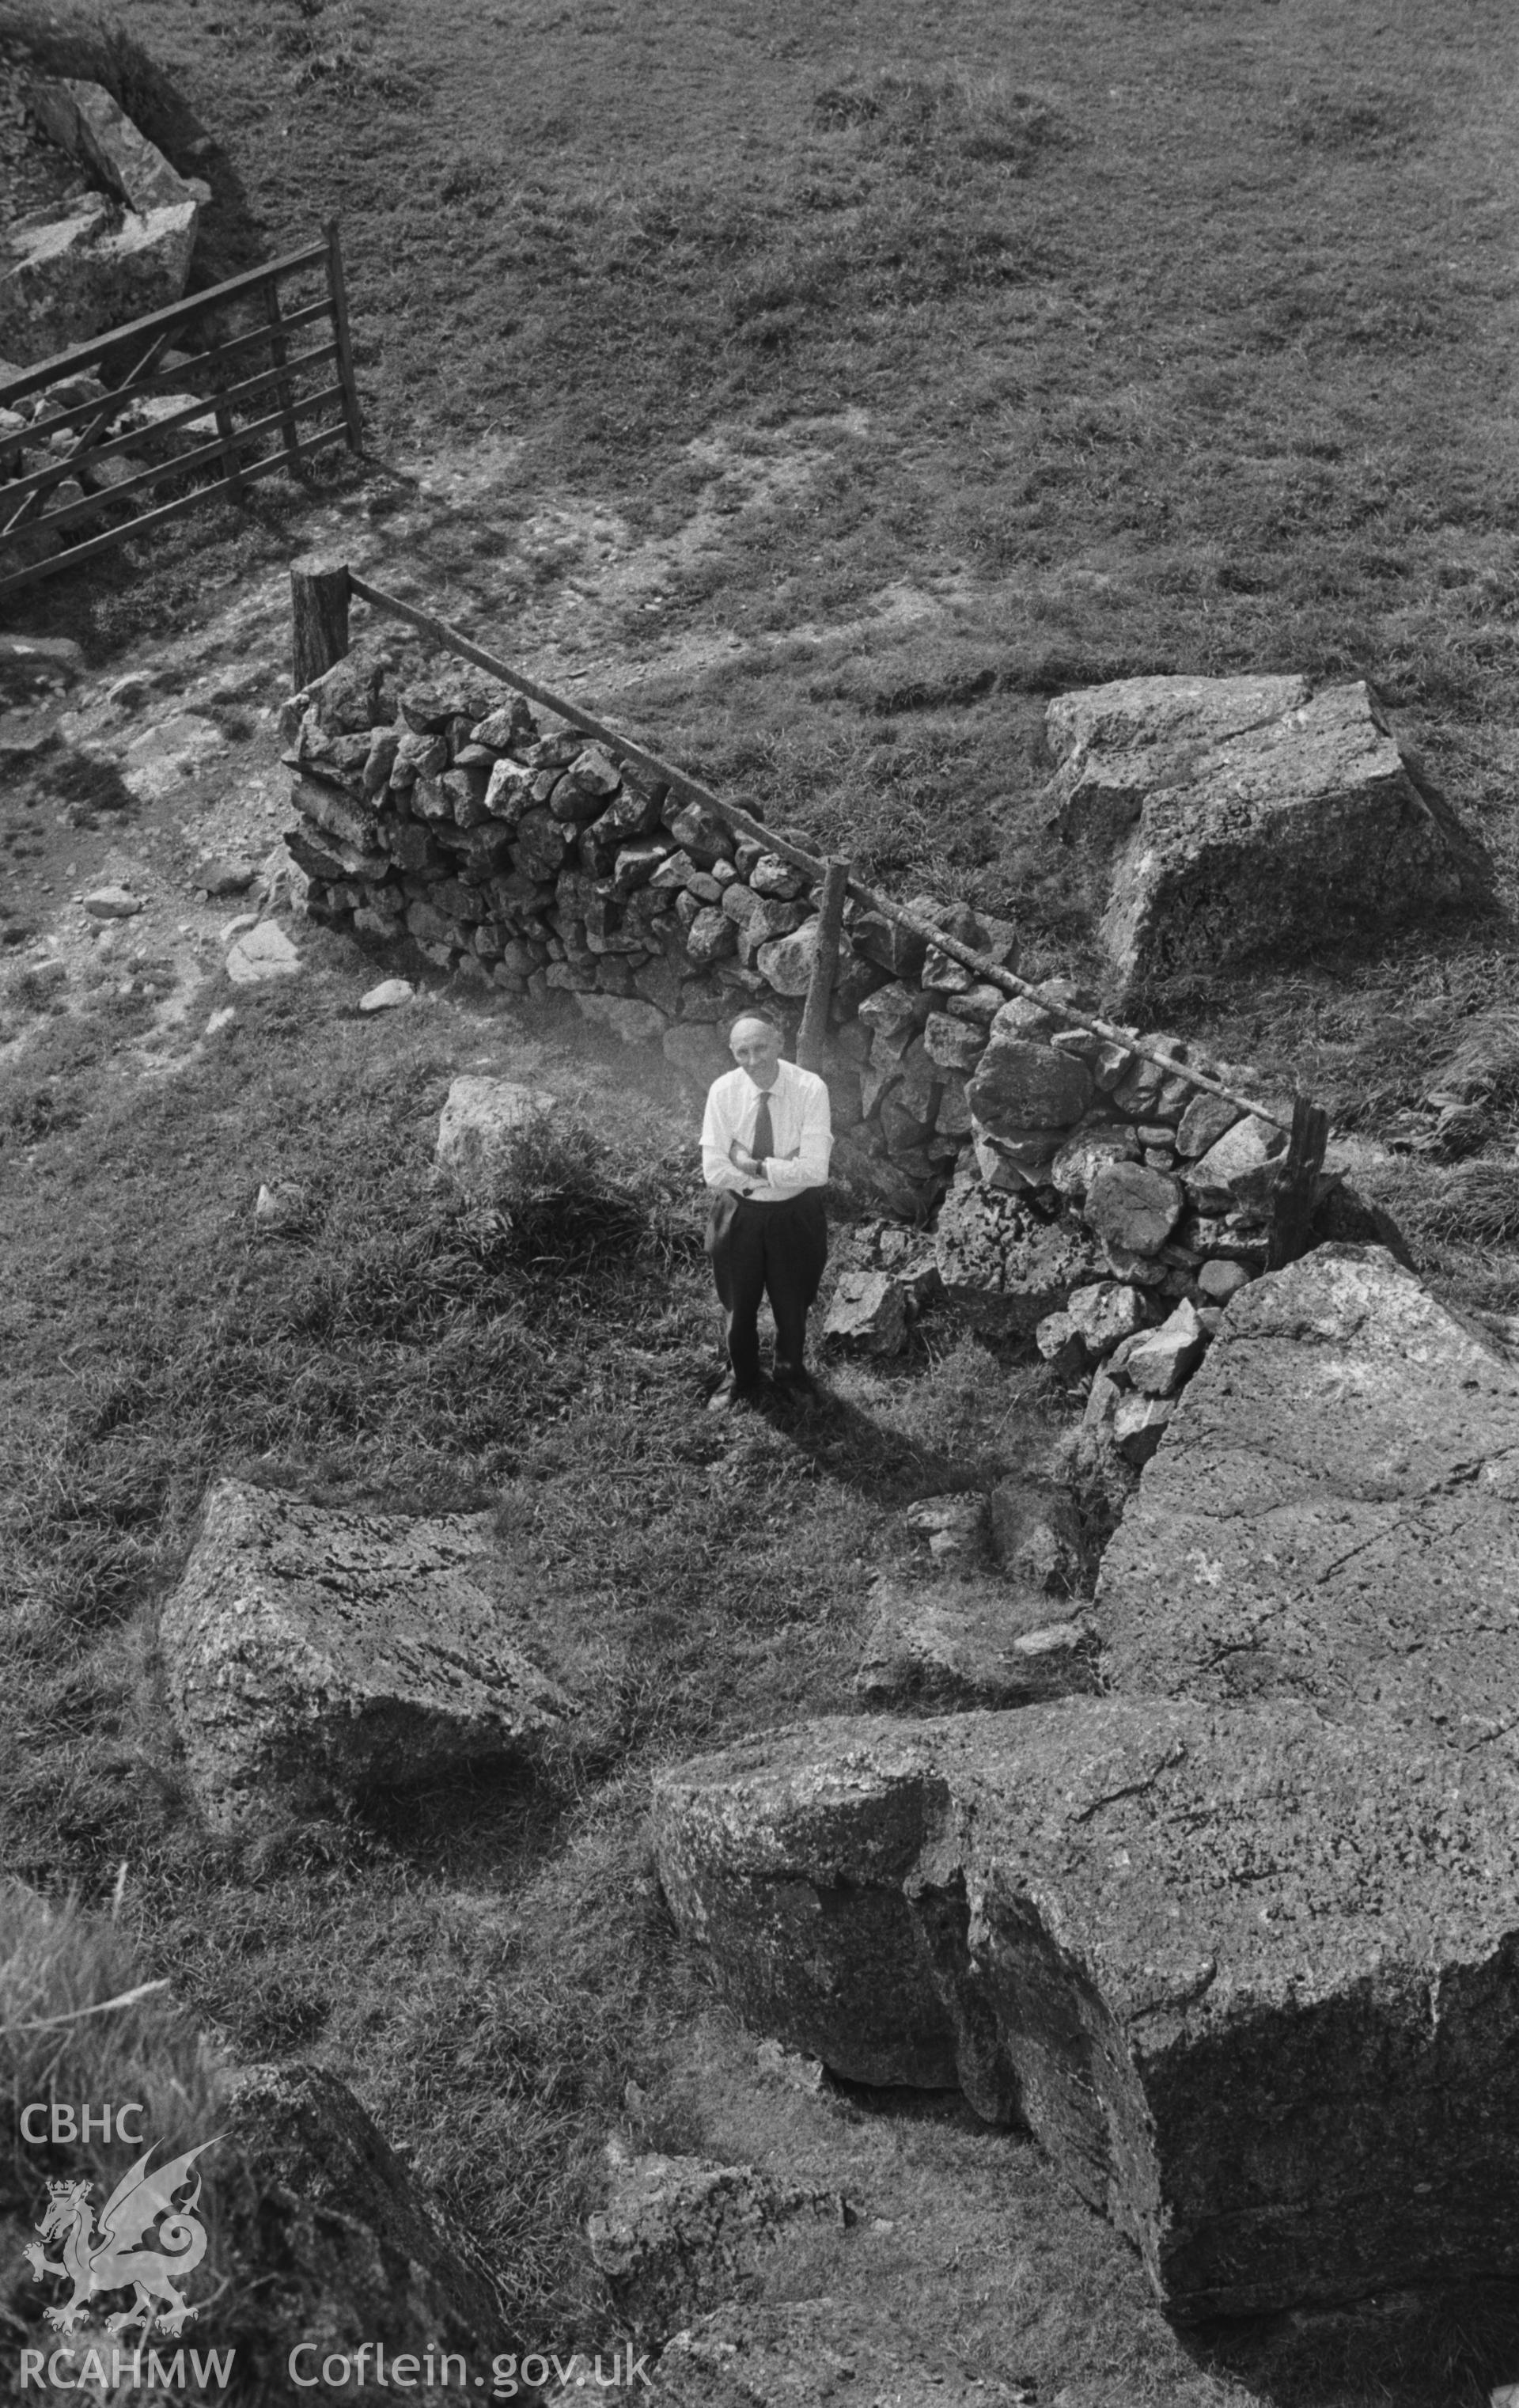 Digital copy of a black and white negative showing man near stone field boundaries at Llanrhaeadr-ym-Mochnant. Photographed by Arthur O. Chater in September 1964.